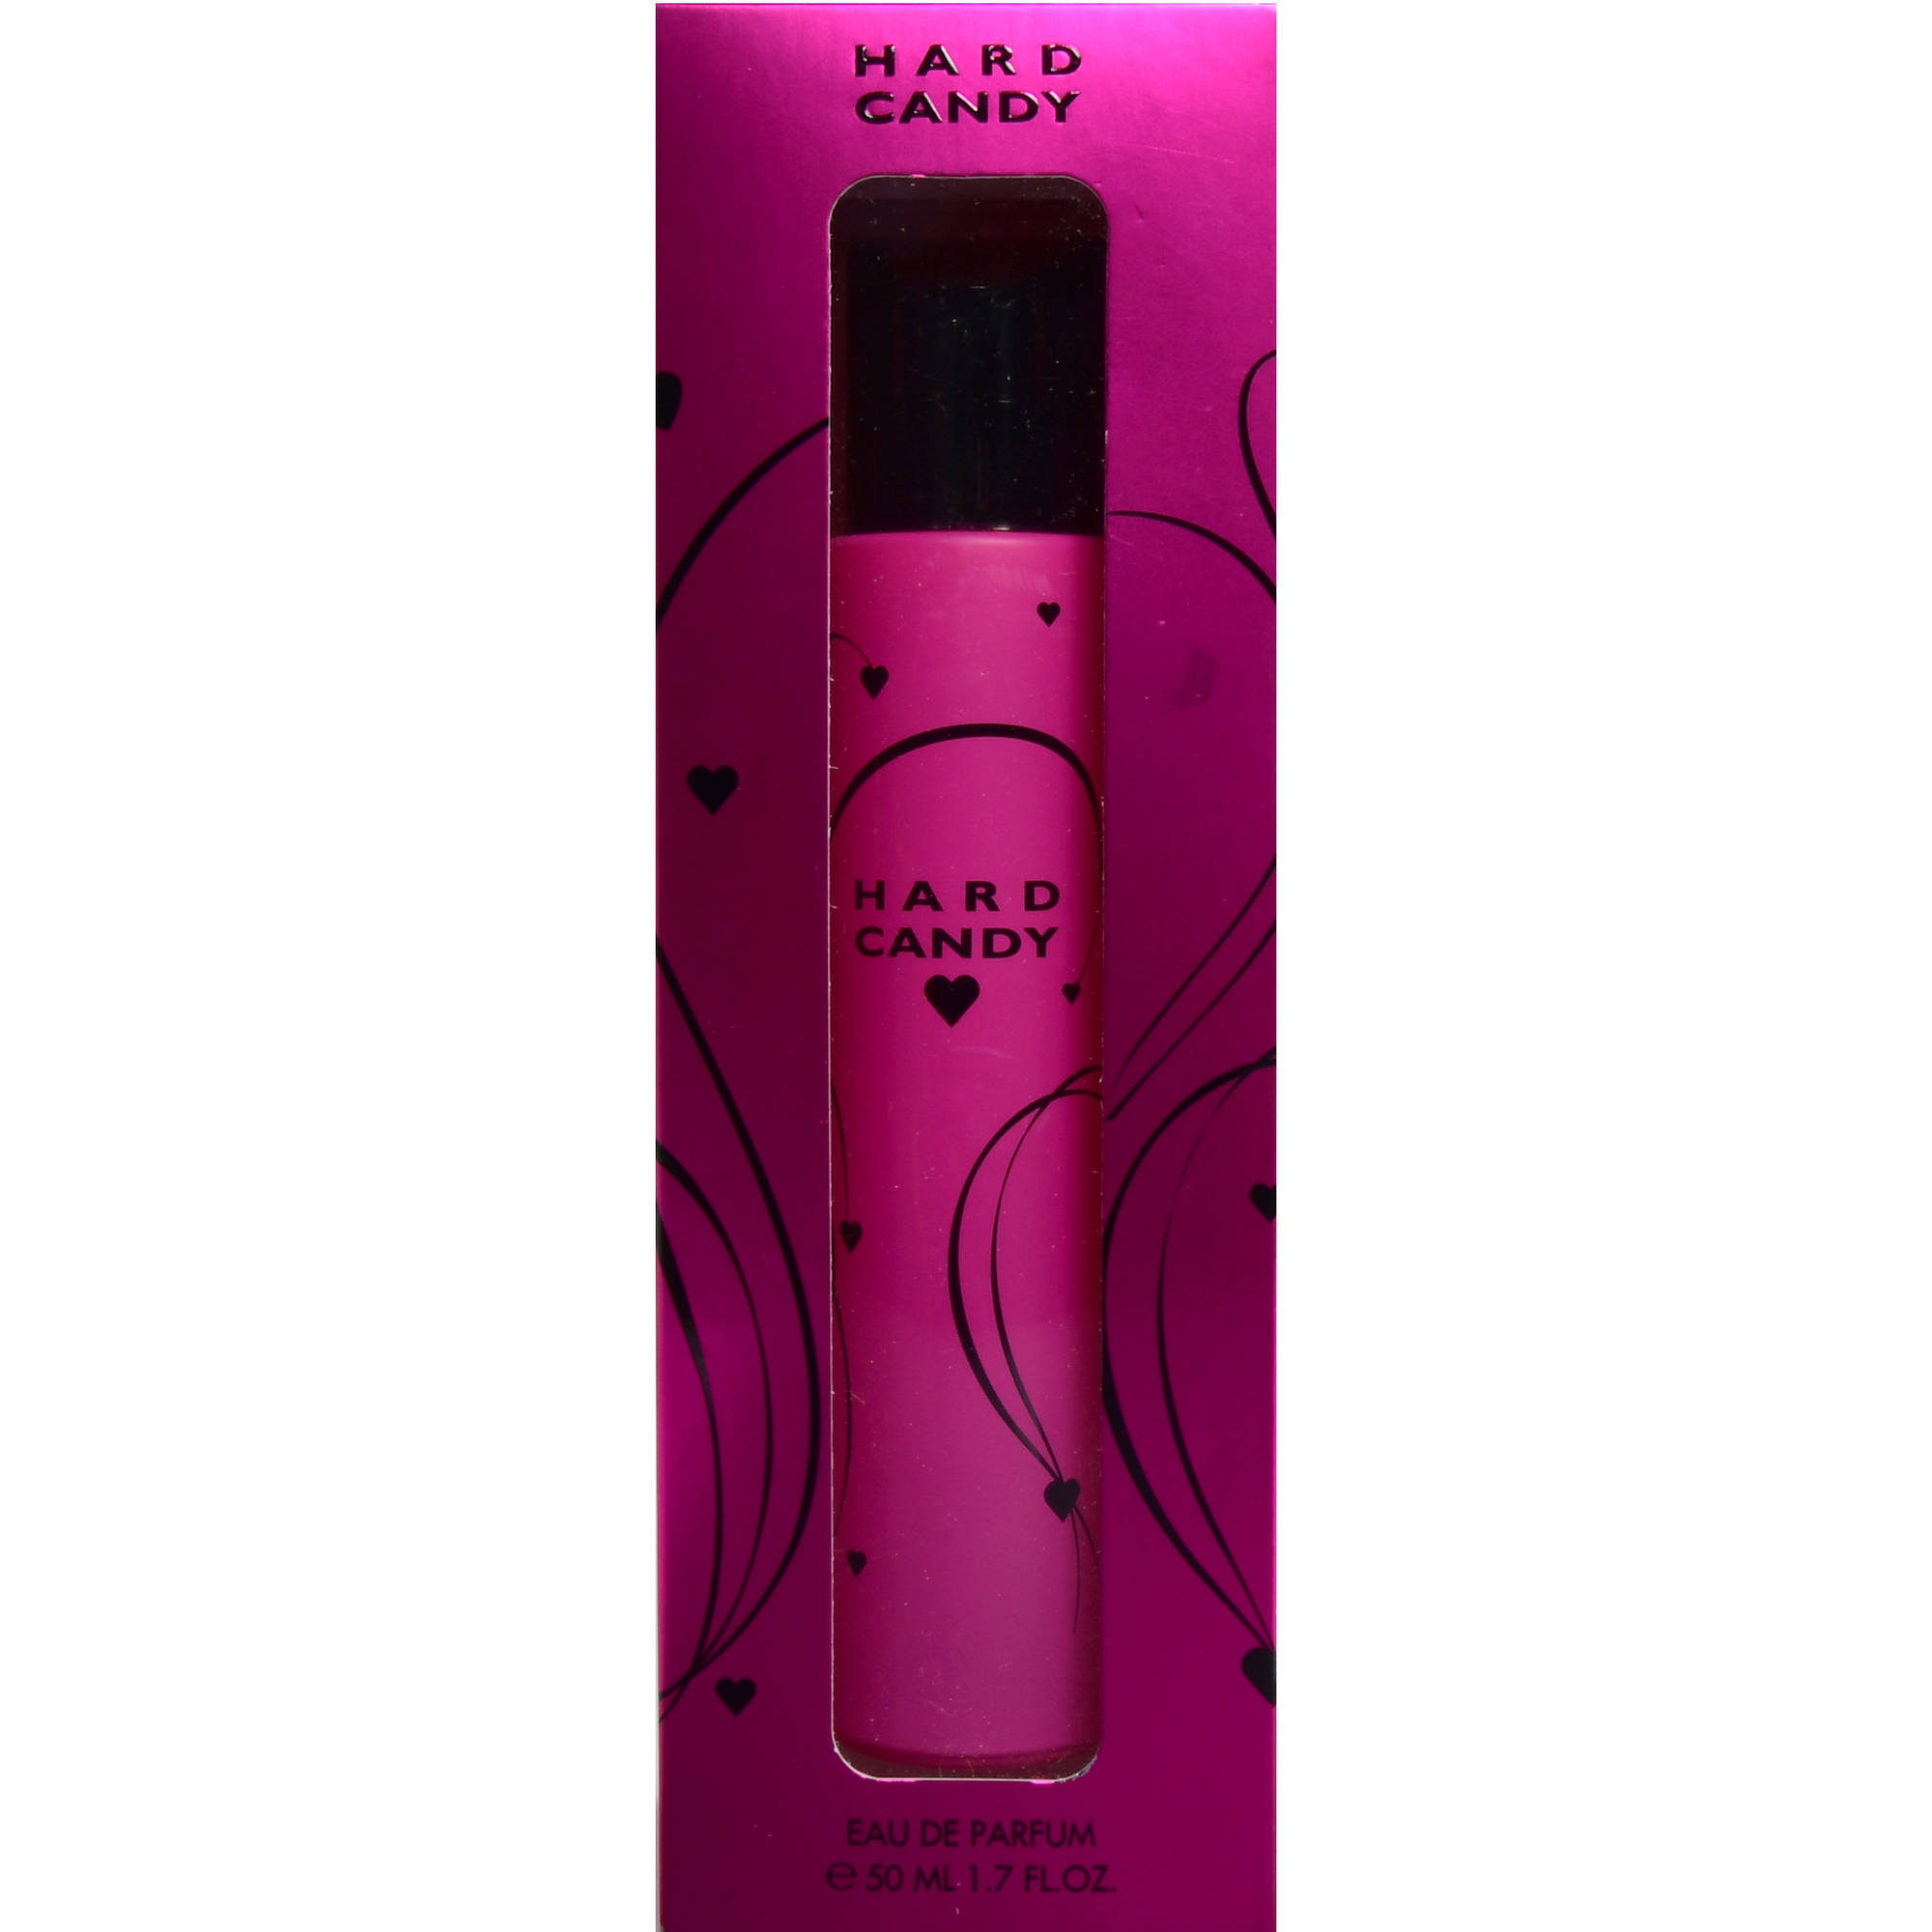 Pink Hard Candy perfume - a fragrance 